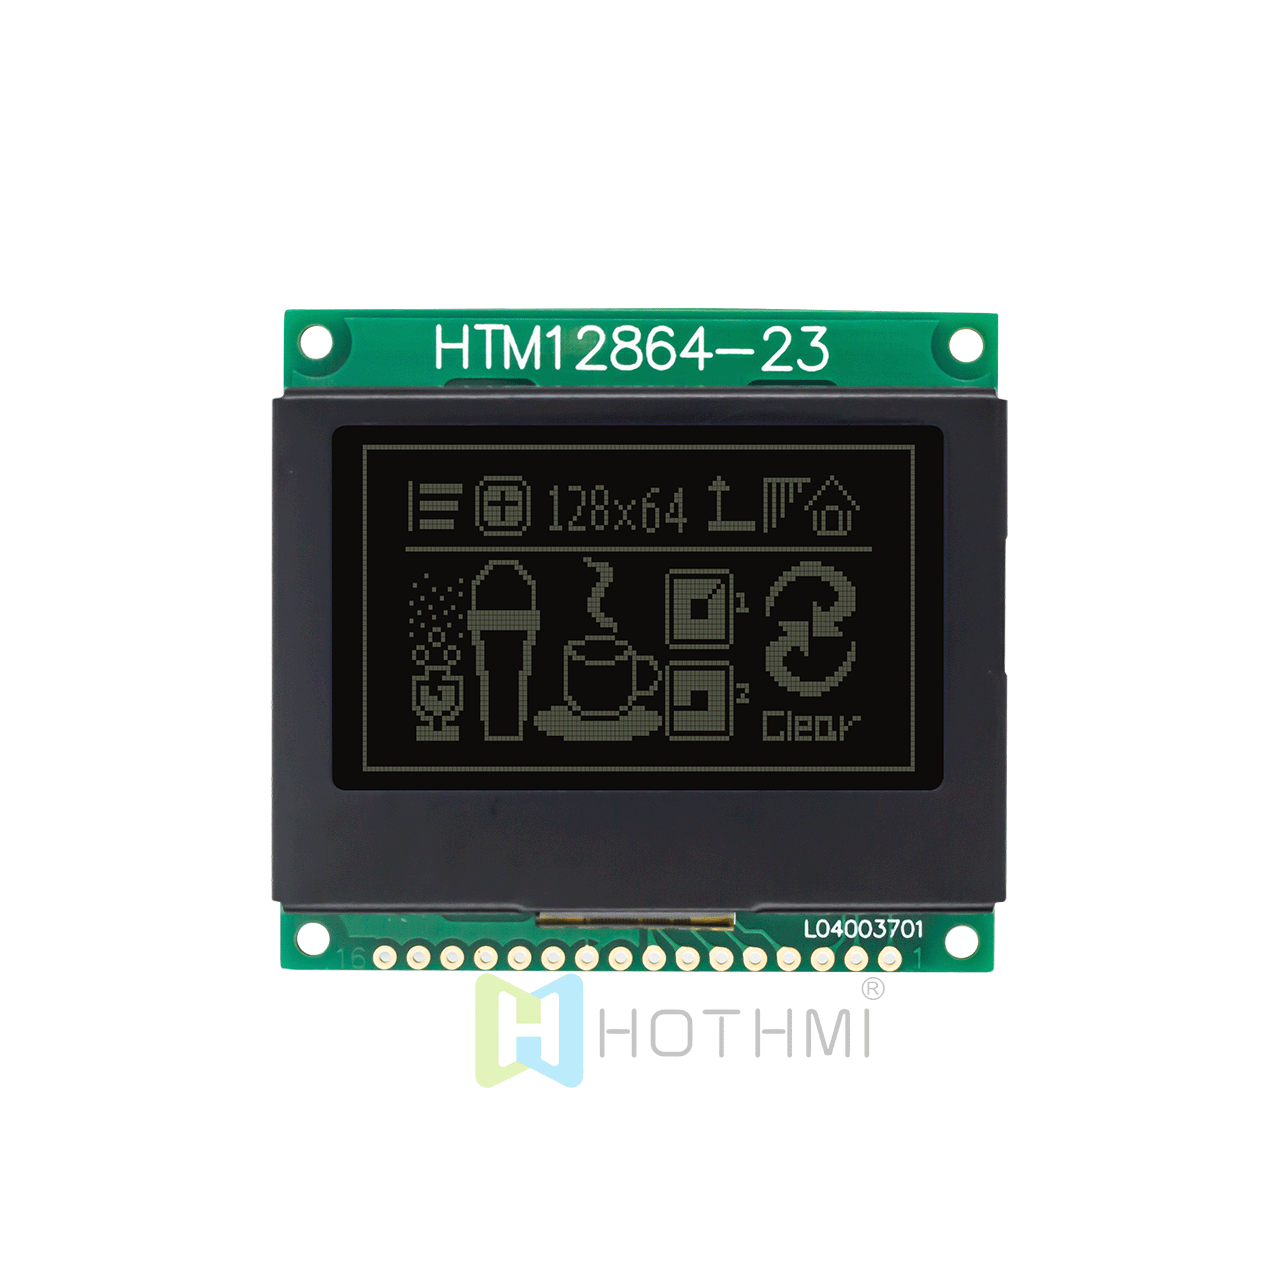 2.0-inch 128x64 low-price graphic LCD module/128x64 graphic LCD module/ST7565 control chip/5.0 black background with white characters